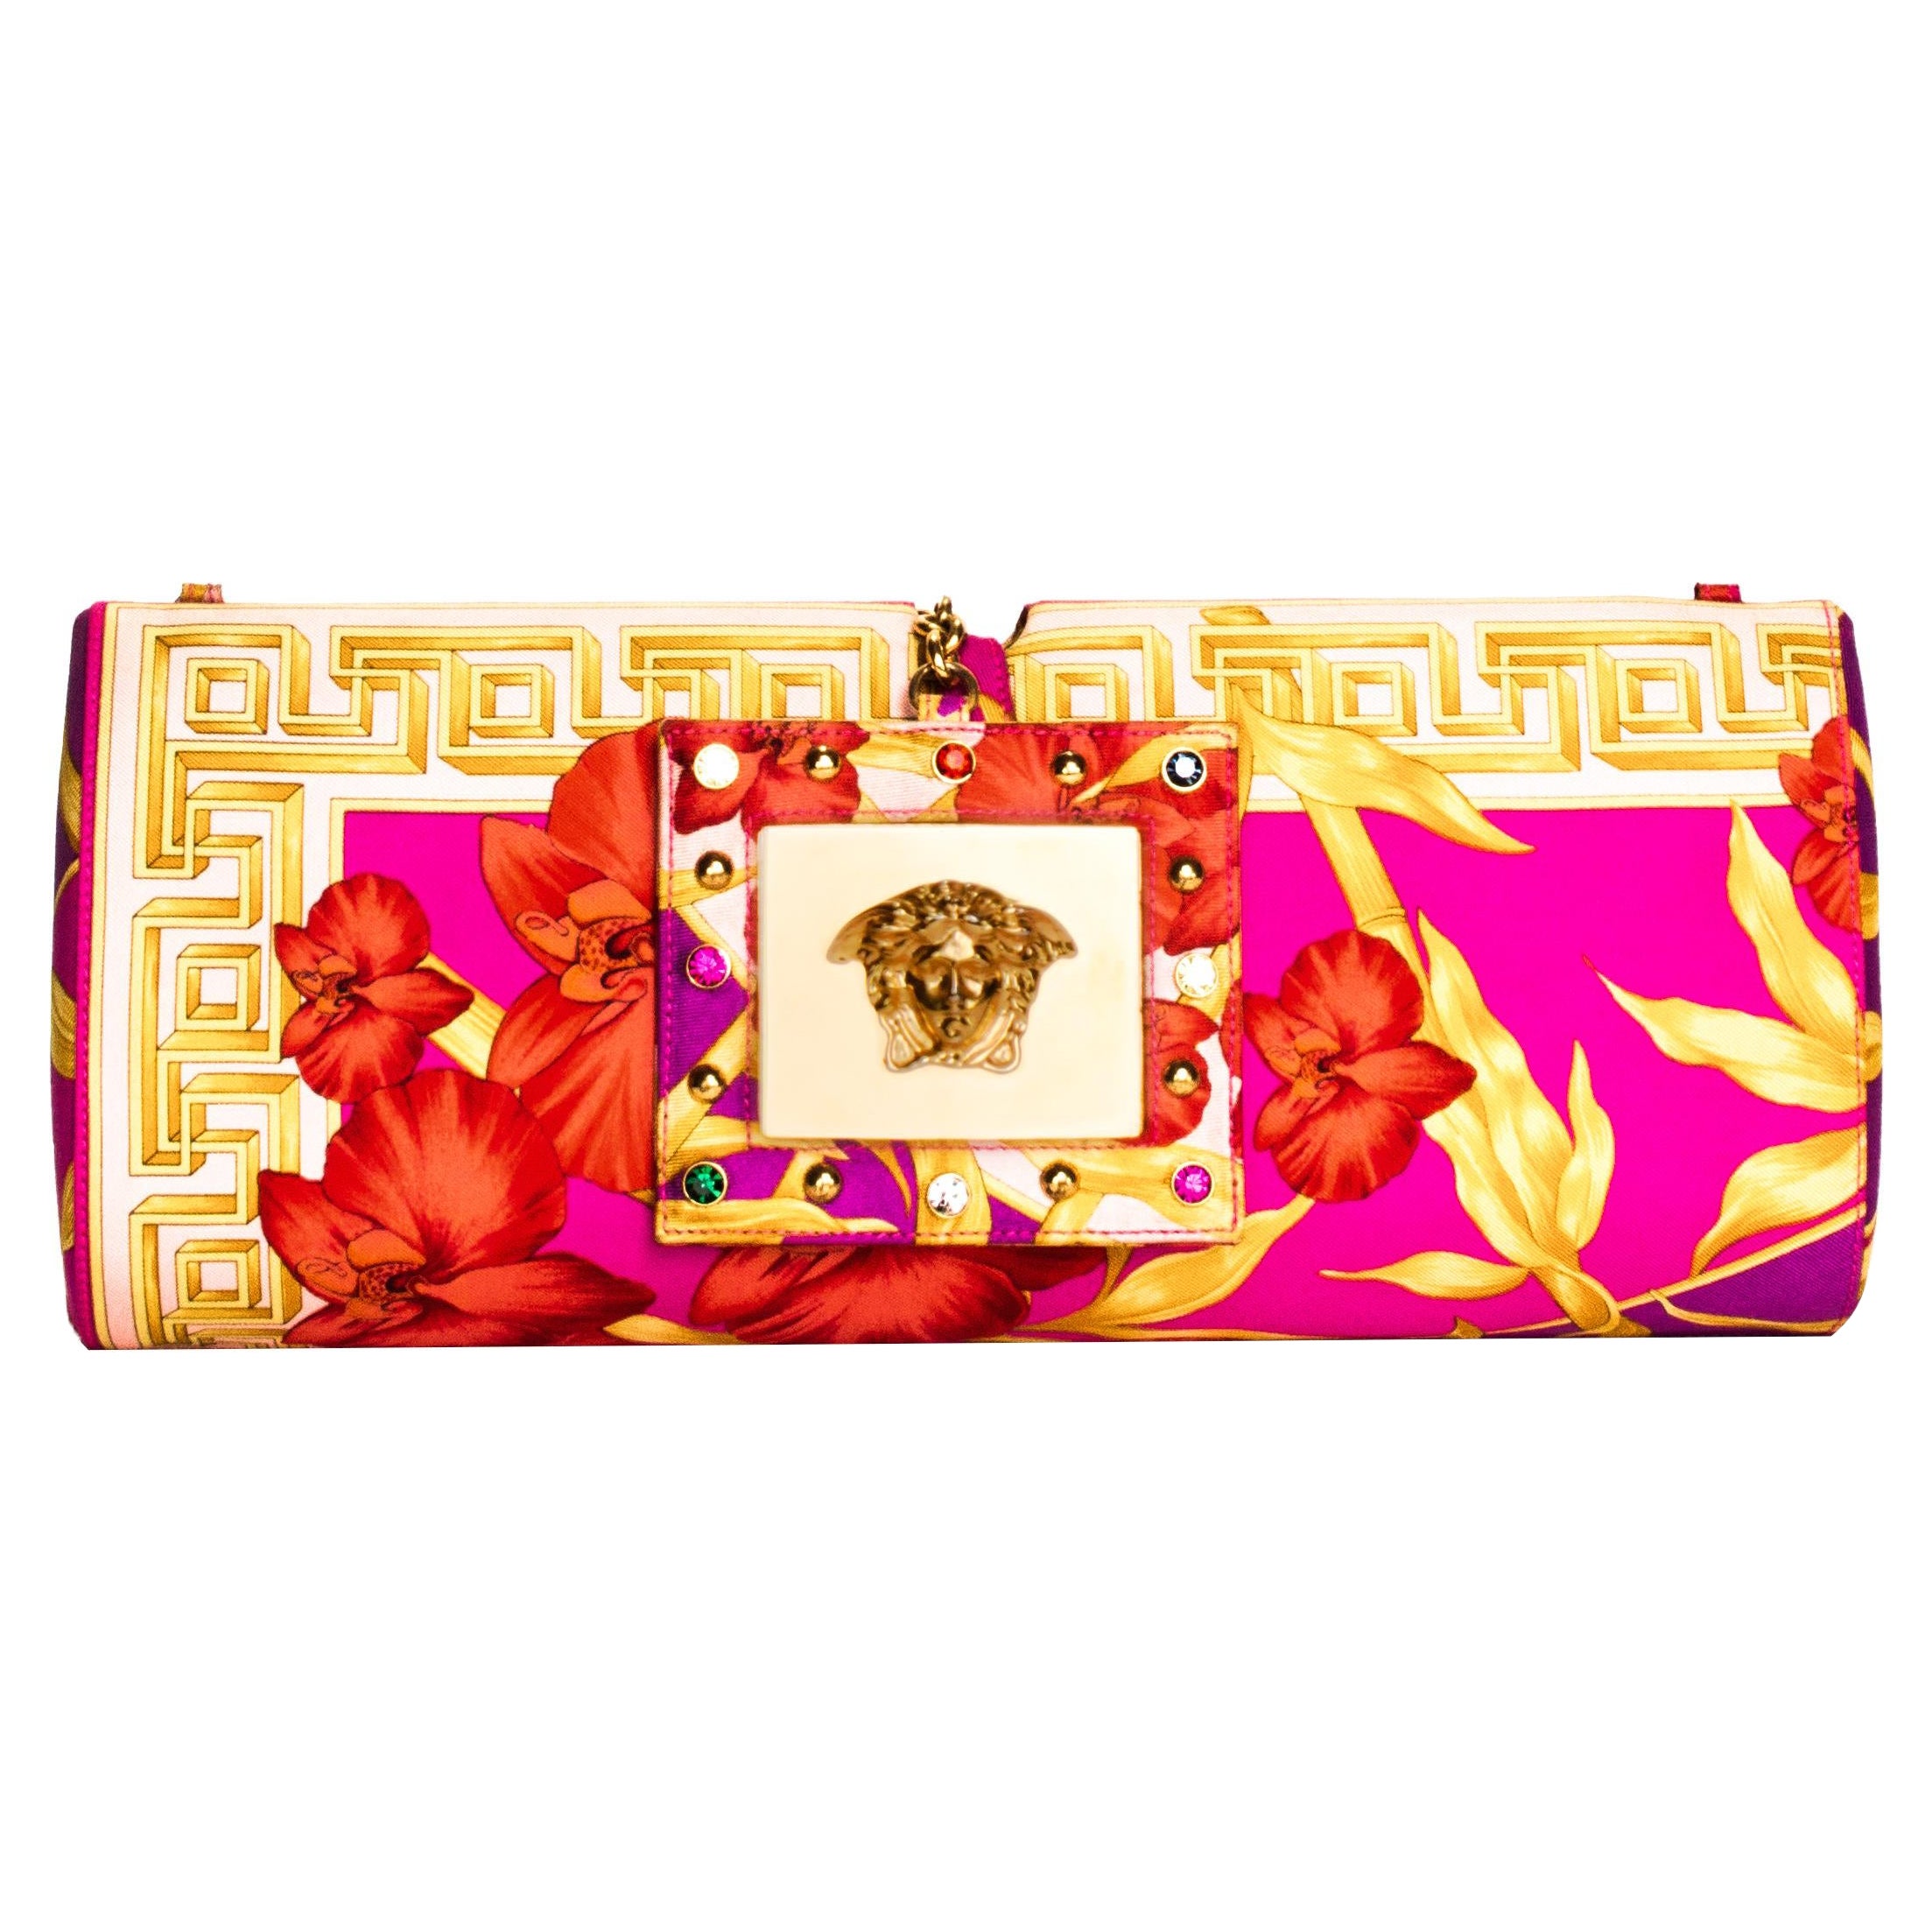 S/S 2000 Gianni Versace by Donatella Runway Pink Printed Silk Convertible Clutch For Sale